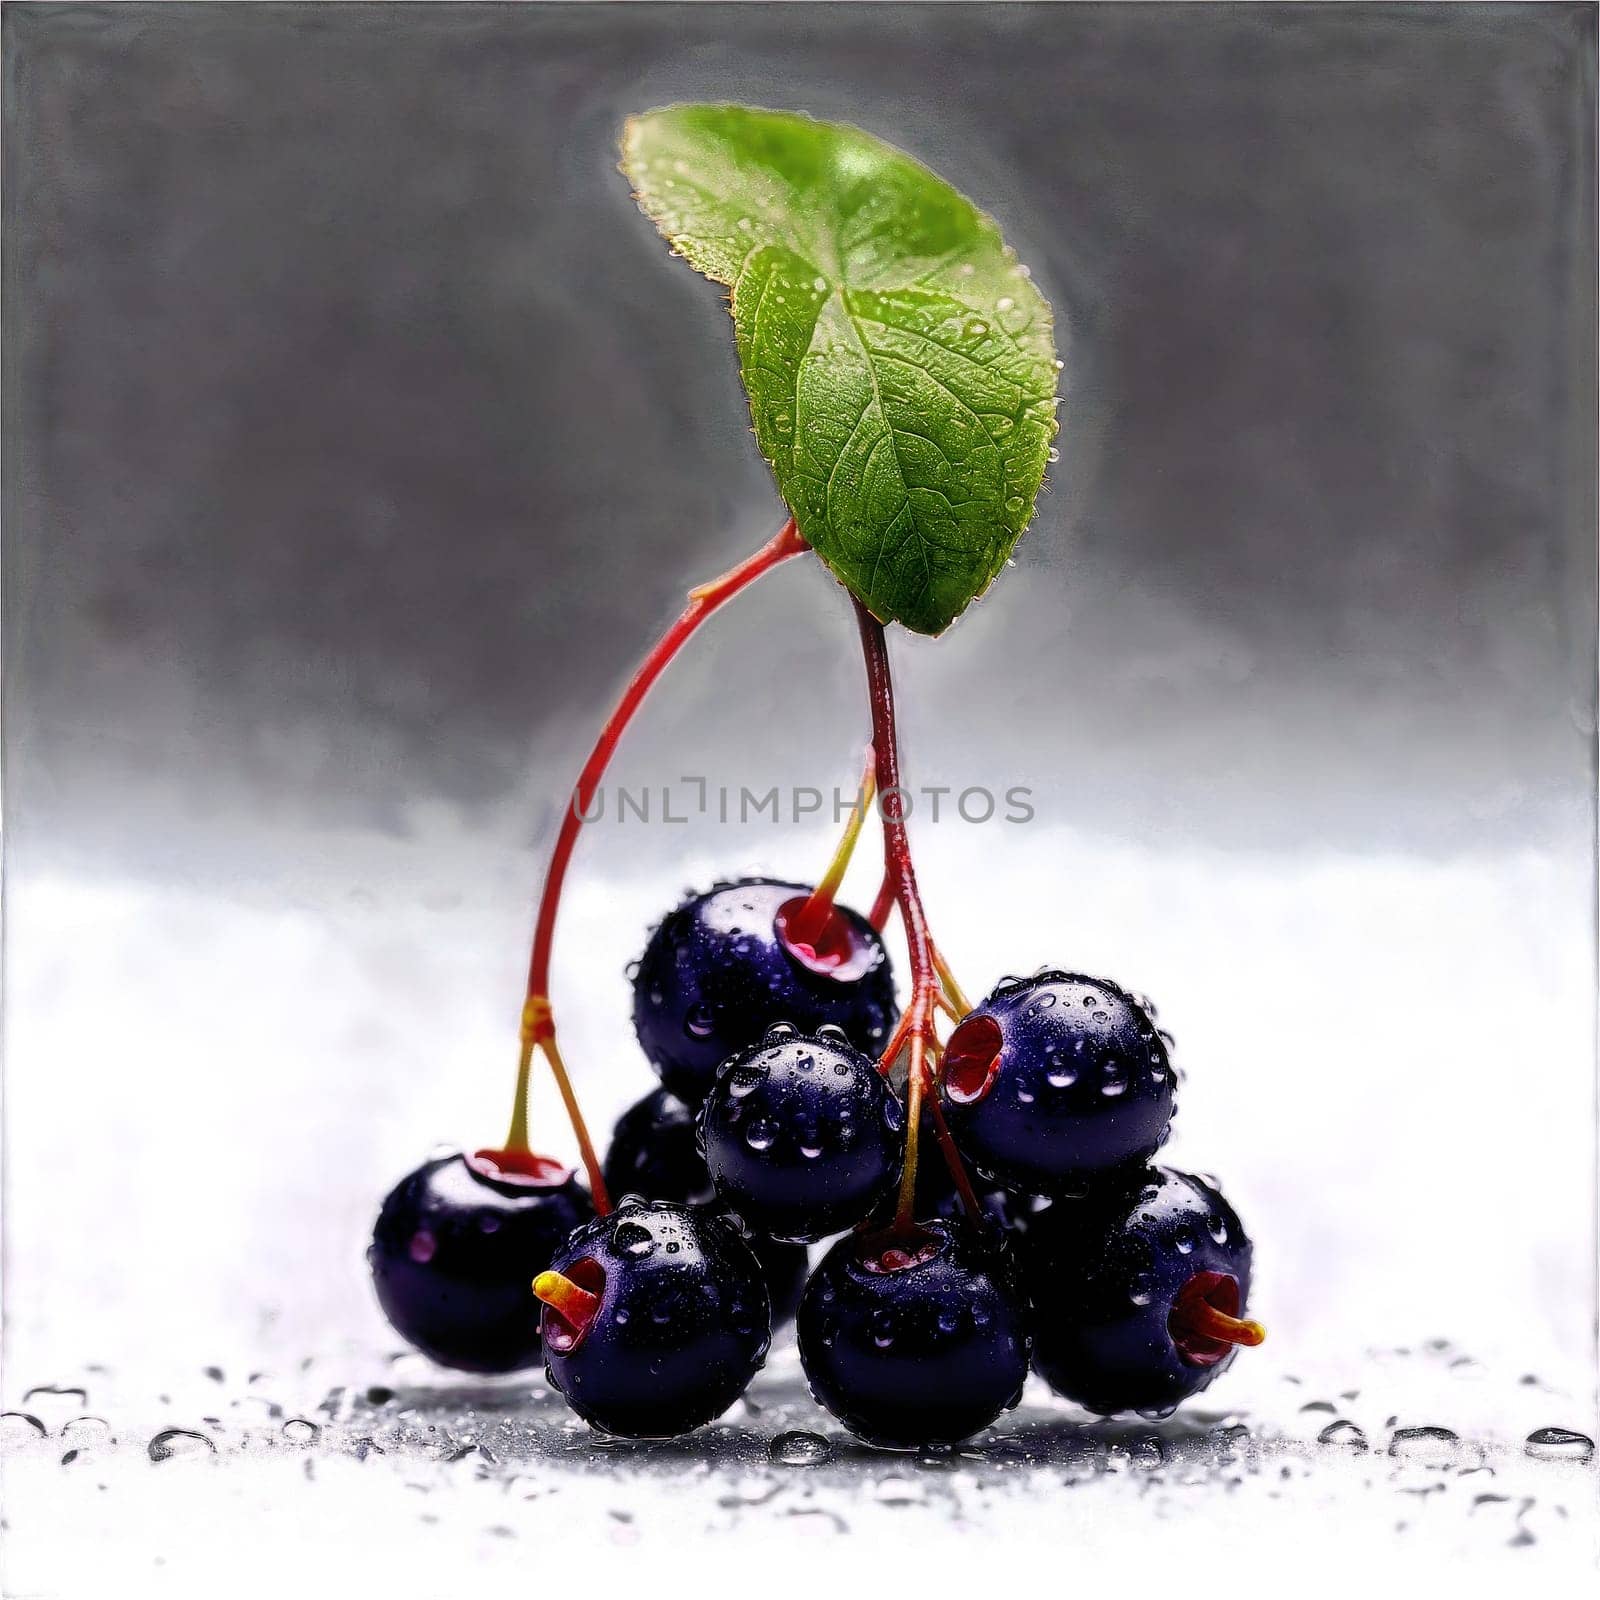 Ripe huckleberries rolling water droplets glistening stems swirling Vaccinium ovatum Food and Culinary concept. Food isolated on transparent background.